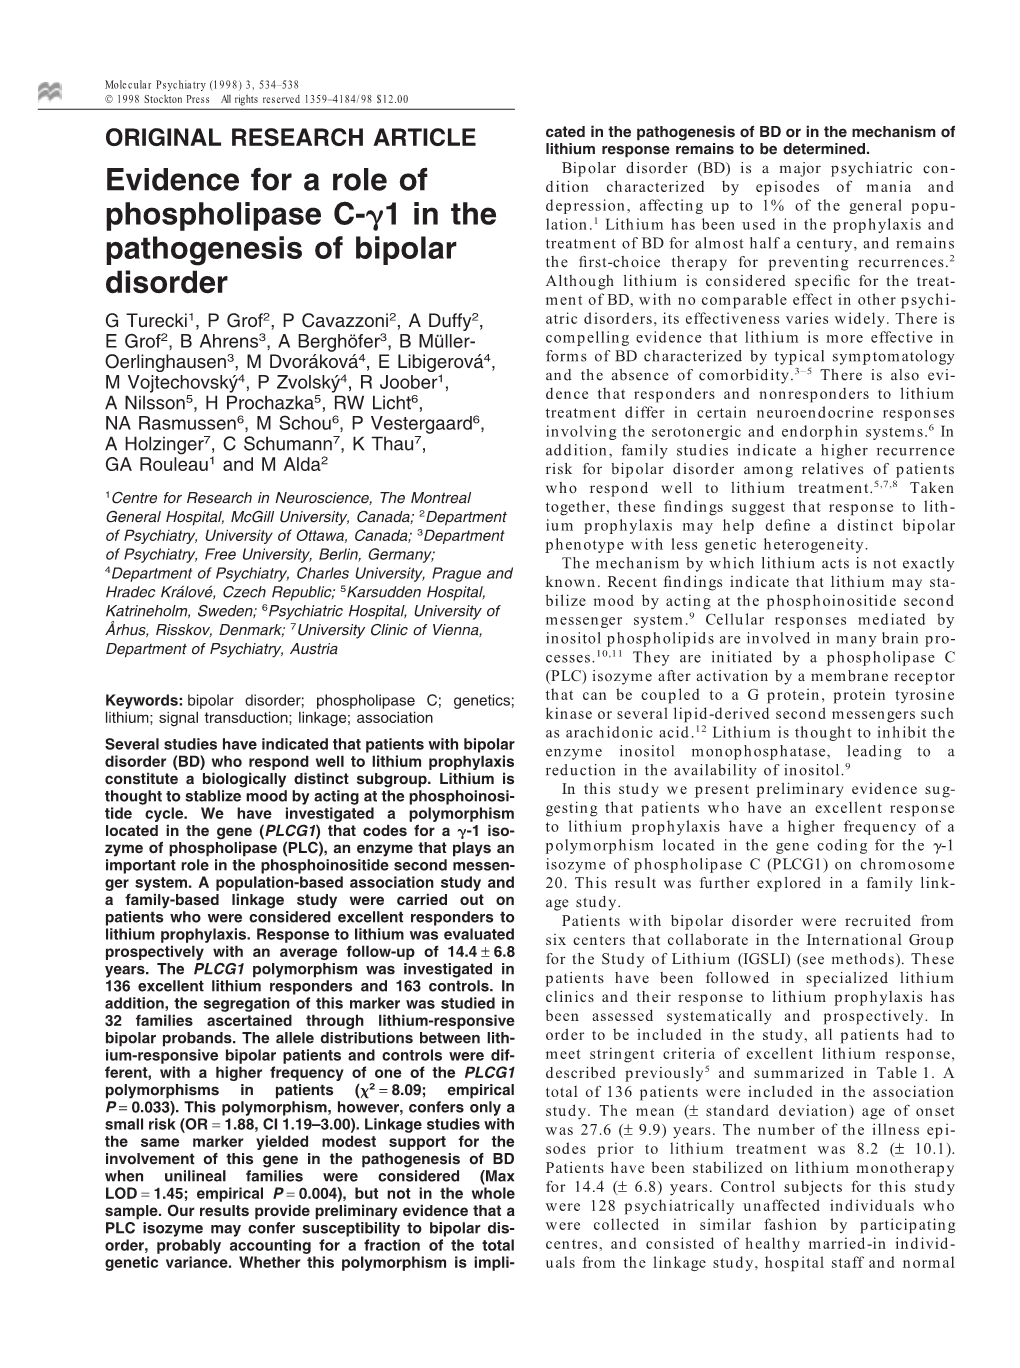 Evidence for a Role of Phospholipase C- 1 in the Pathogenesis of Bipolar